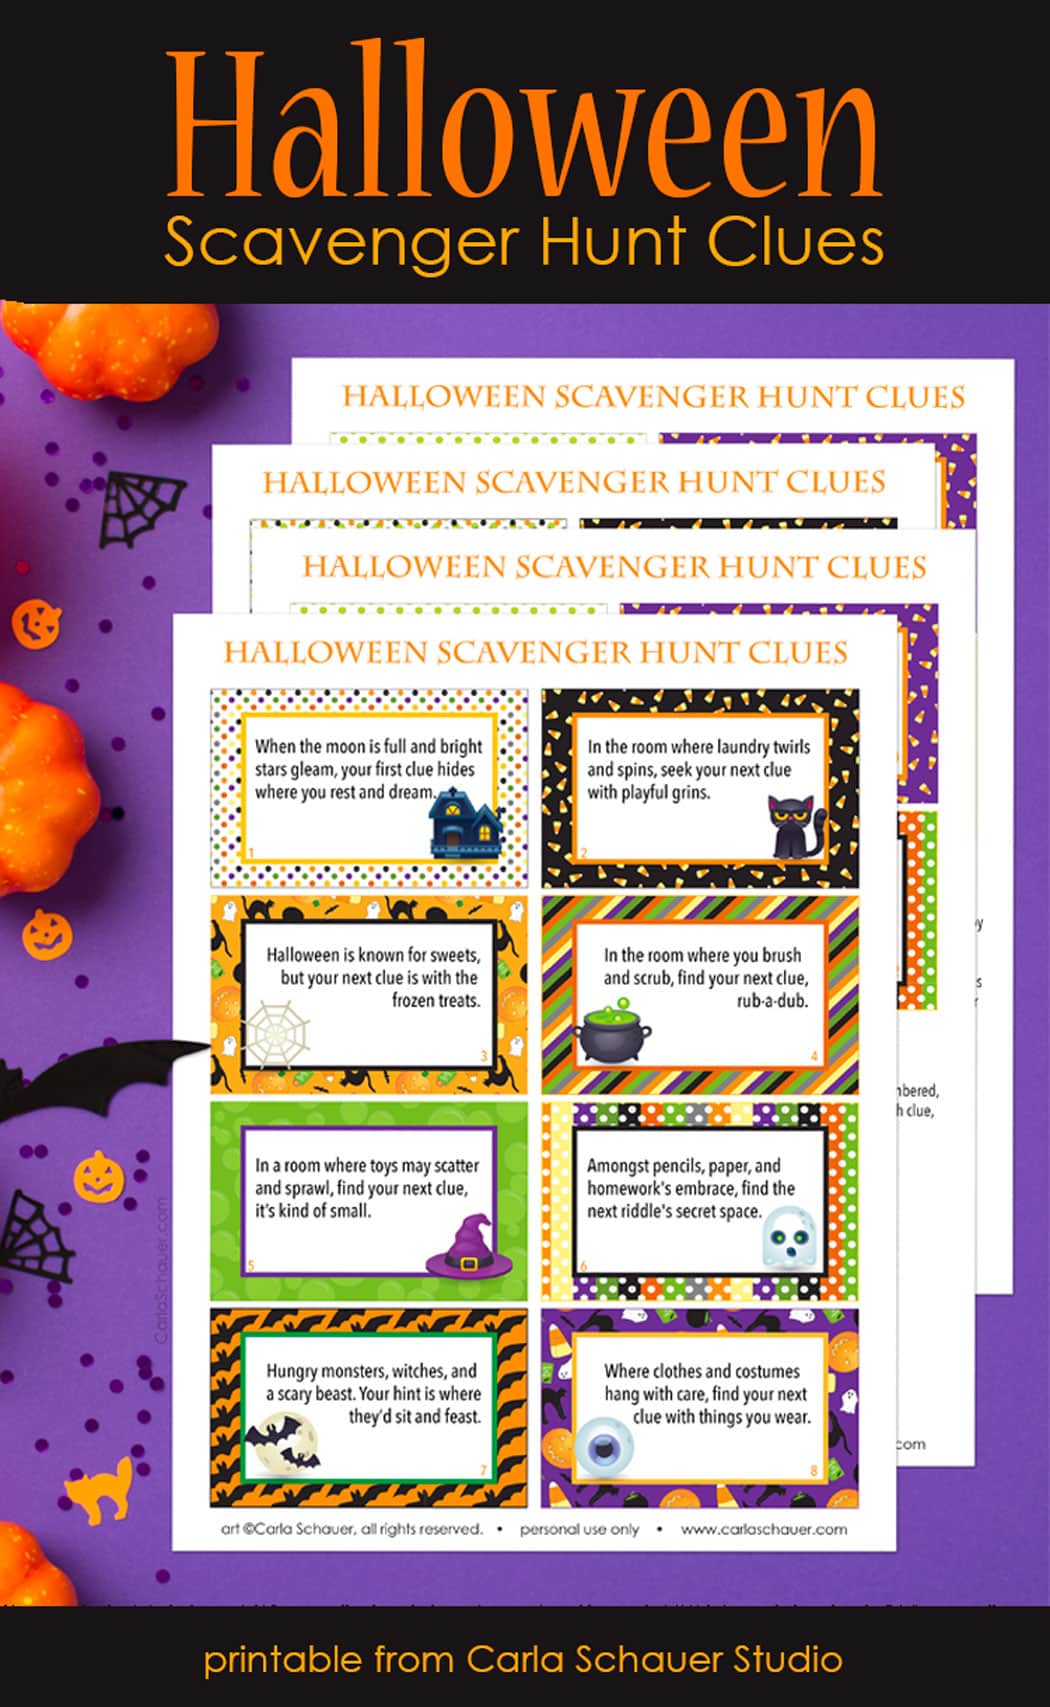 Four printed pages of Halloween Scavenger Hunt clues, with 8 halloween themed clues on each. Pages are on a purple background with small orange pumpkins and black bat and spider web confetti on the left side. Black bar with text at top and bottom reads "Halloween Scavenger Hunt Clues, printables from Carla Schauer Studio."